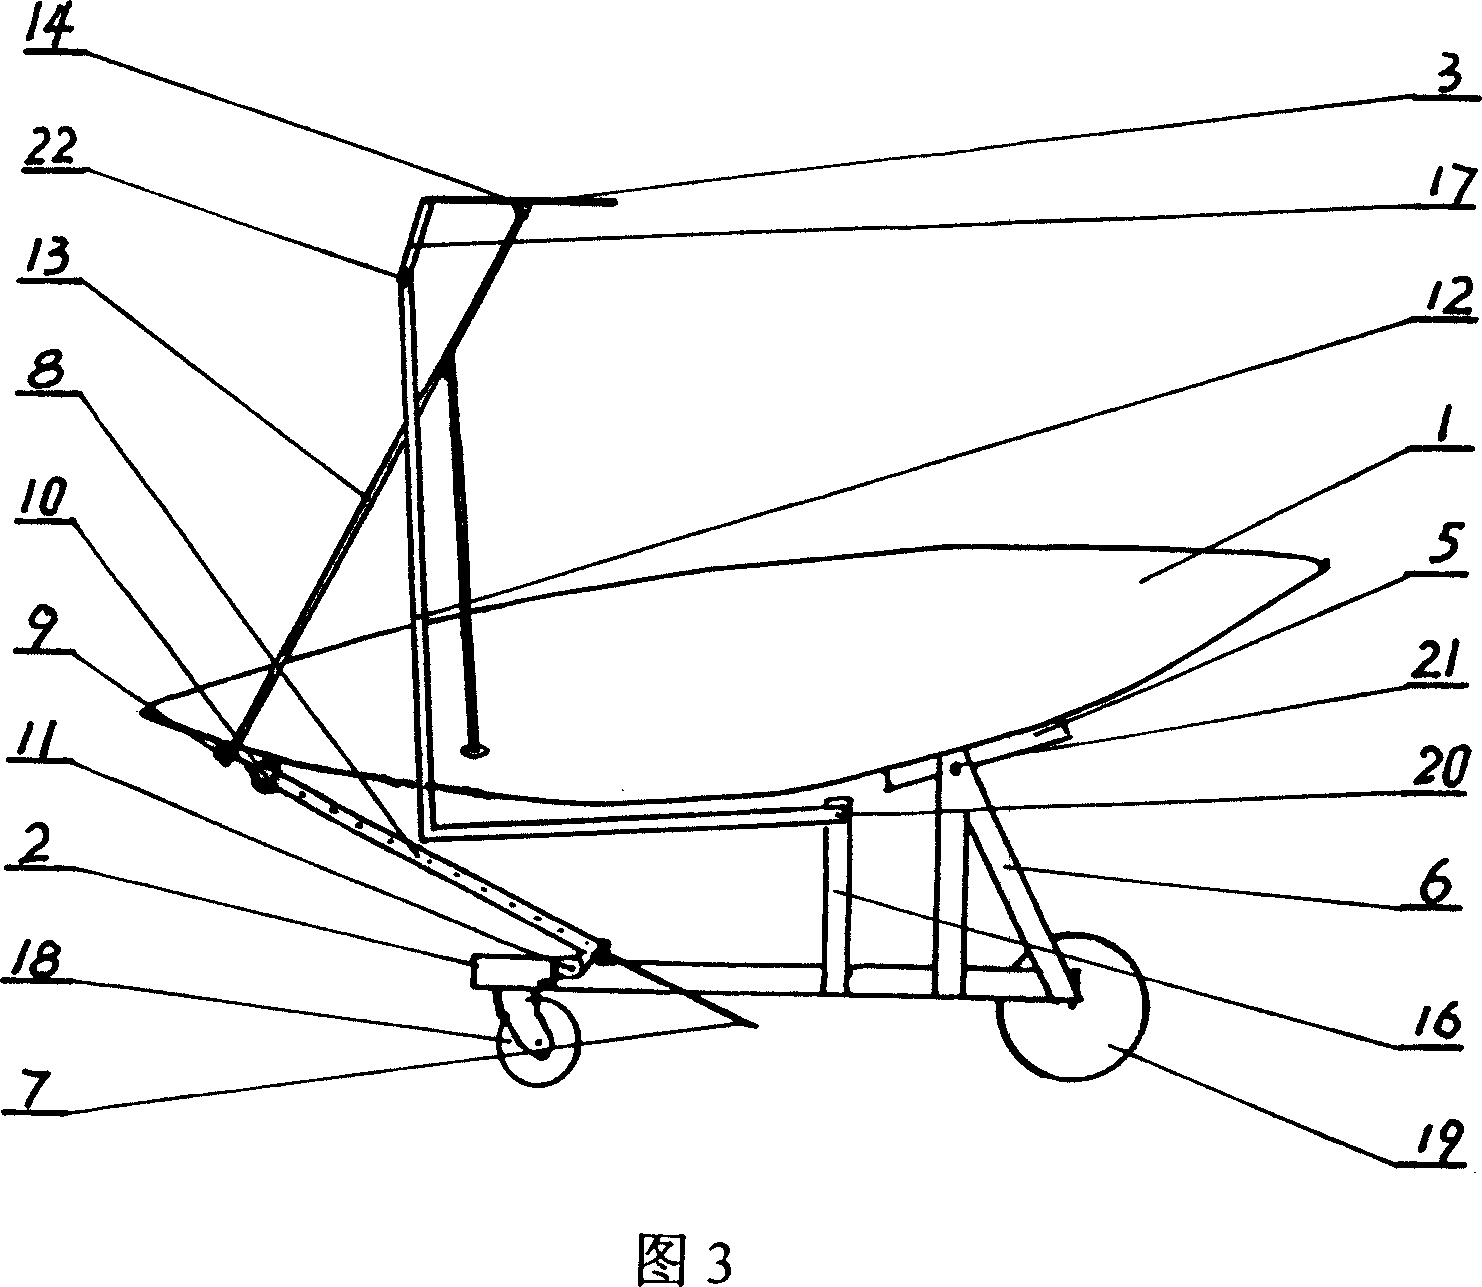 Moveable solar range supporting mechanism